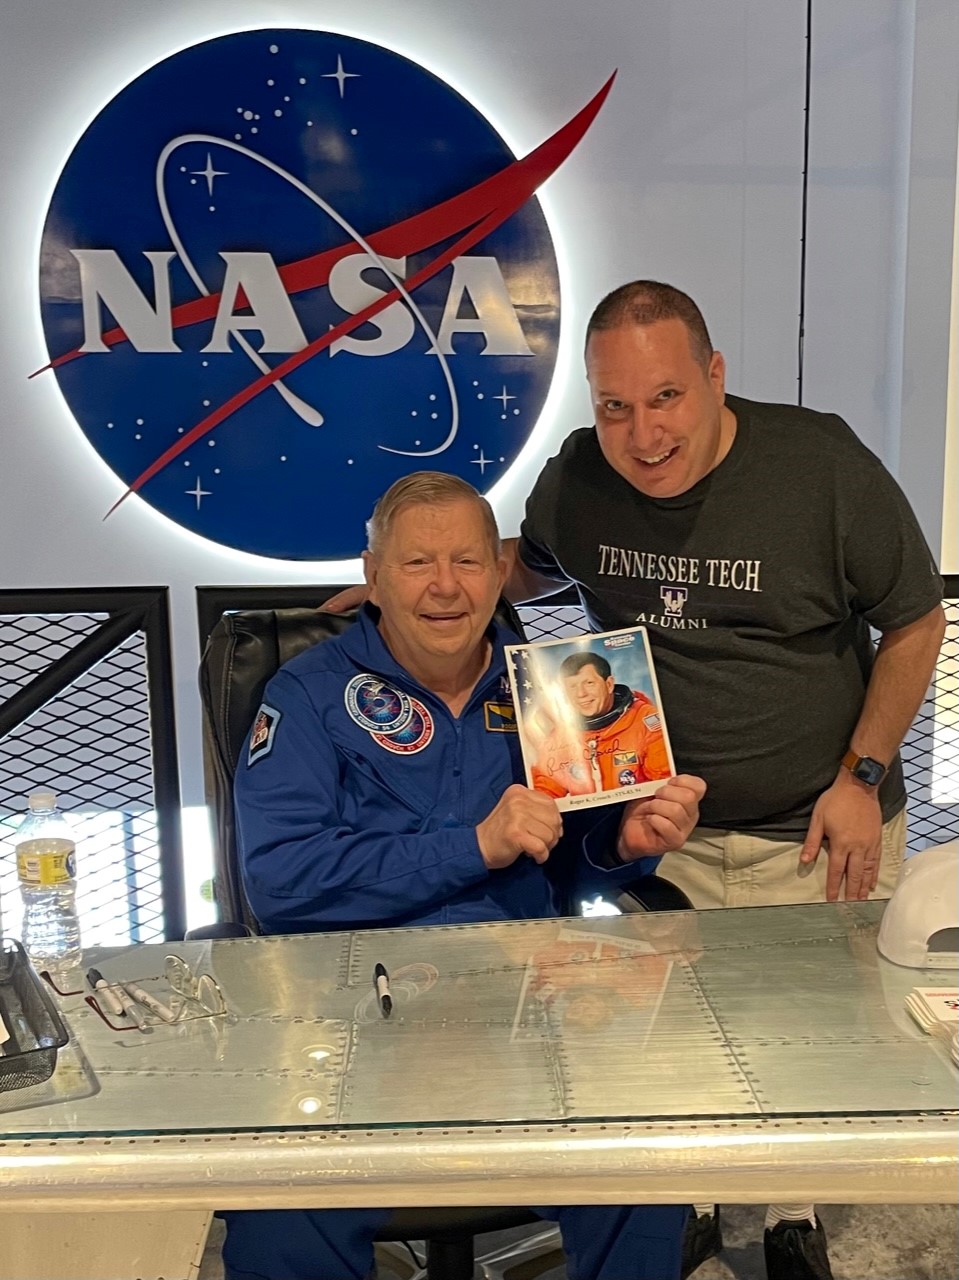 Dr. Roger Crouch poses with a signed photo of himself and Shawn Ratner